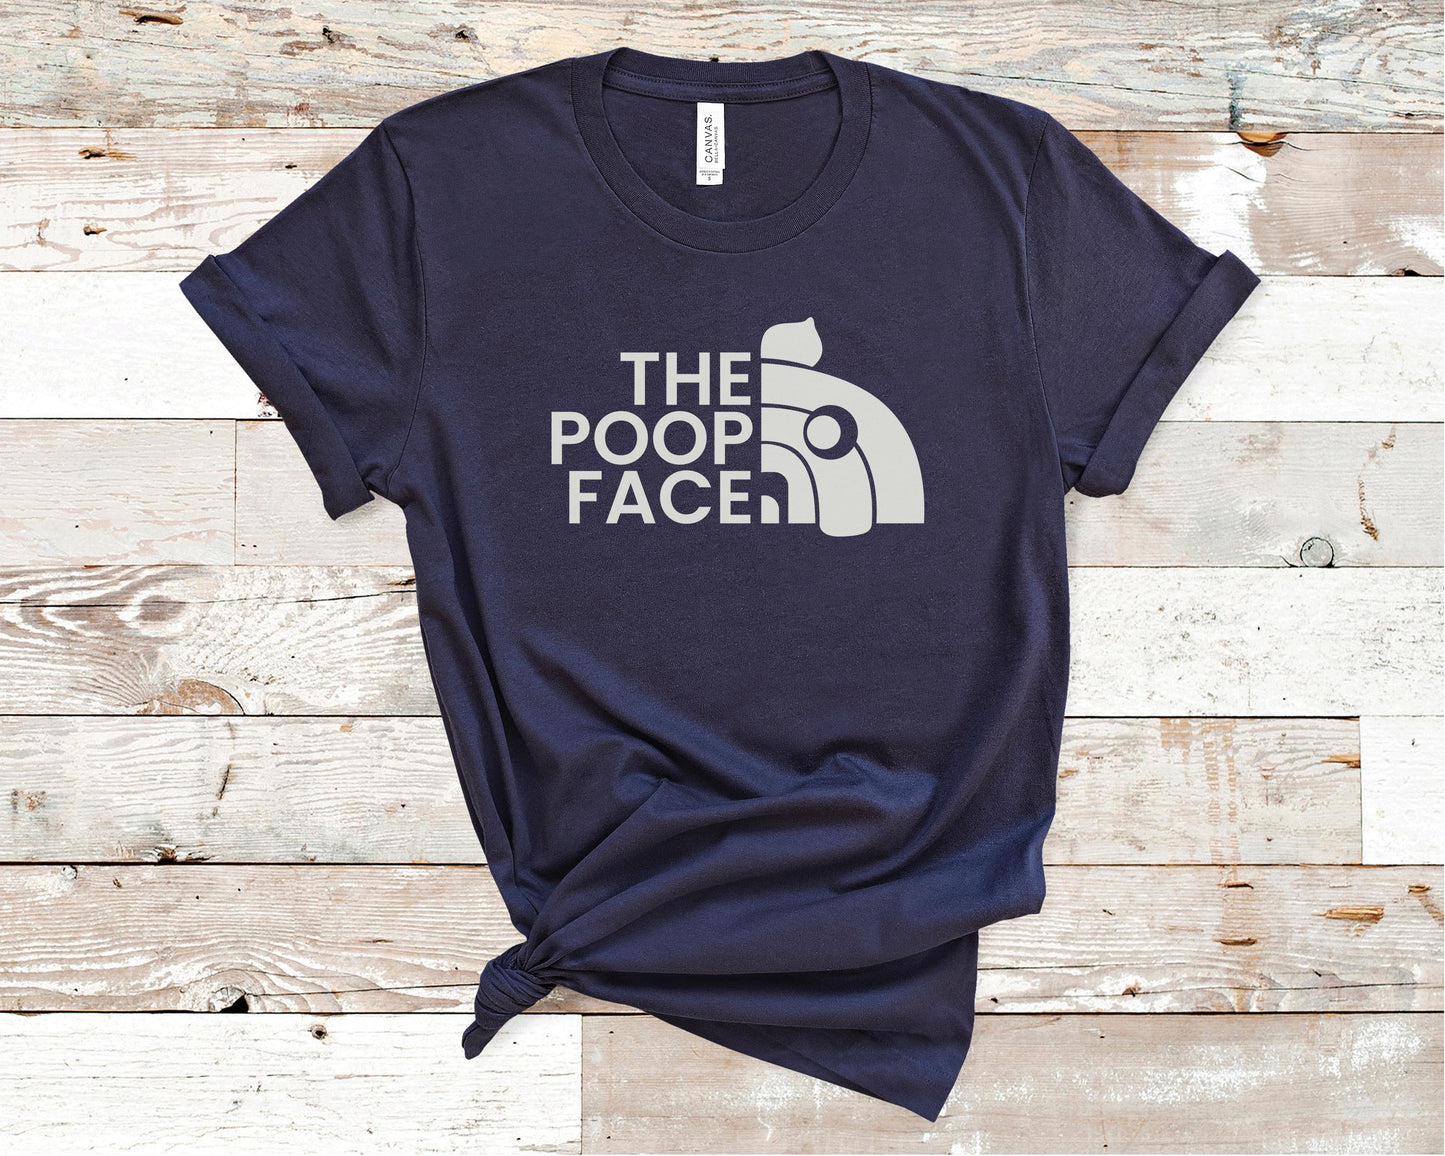 The Poop Face - Funny/ Sarcastic